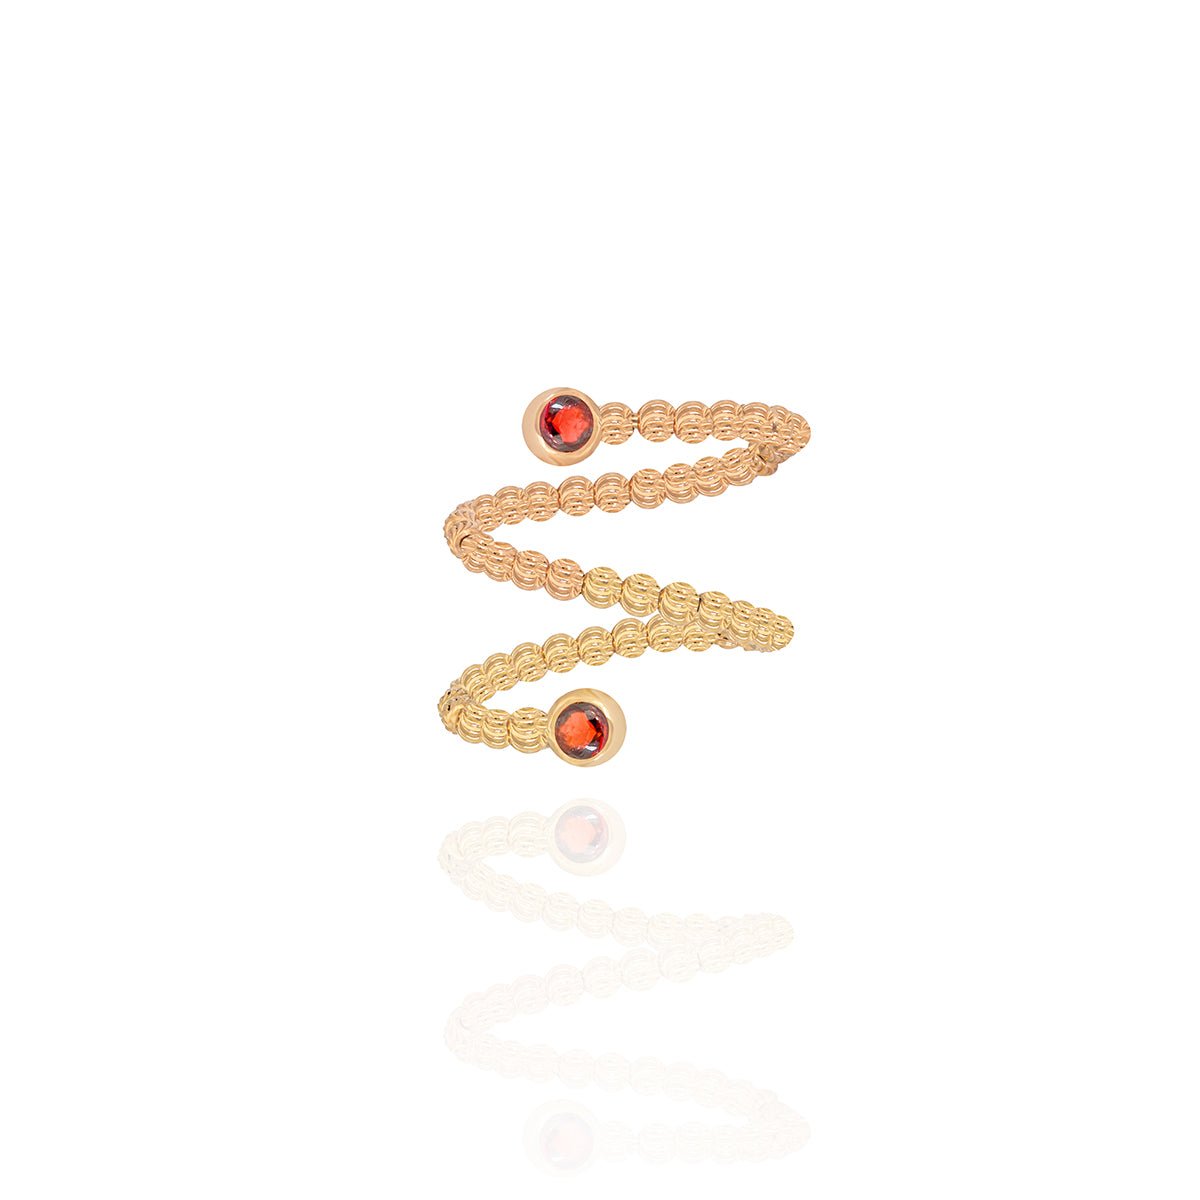 Flexible Coil Ring Adorned with Two Exquisite Round Red Semi-Precious Stones